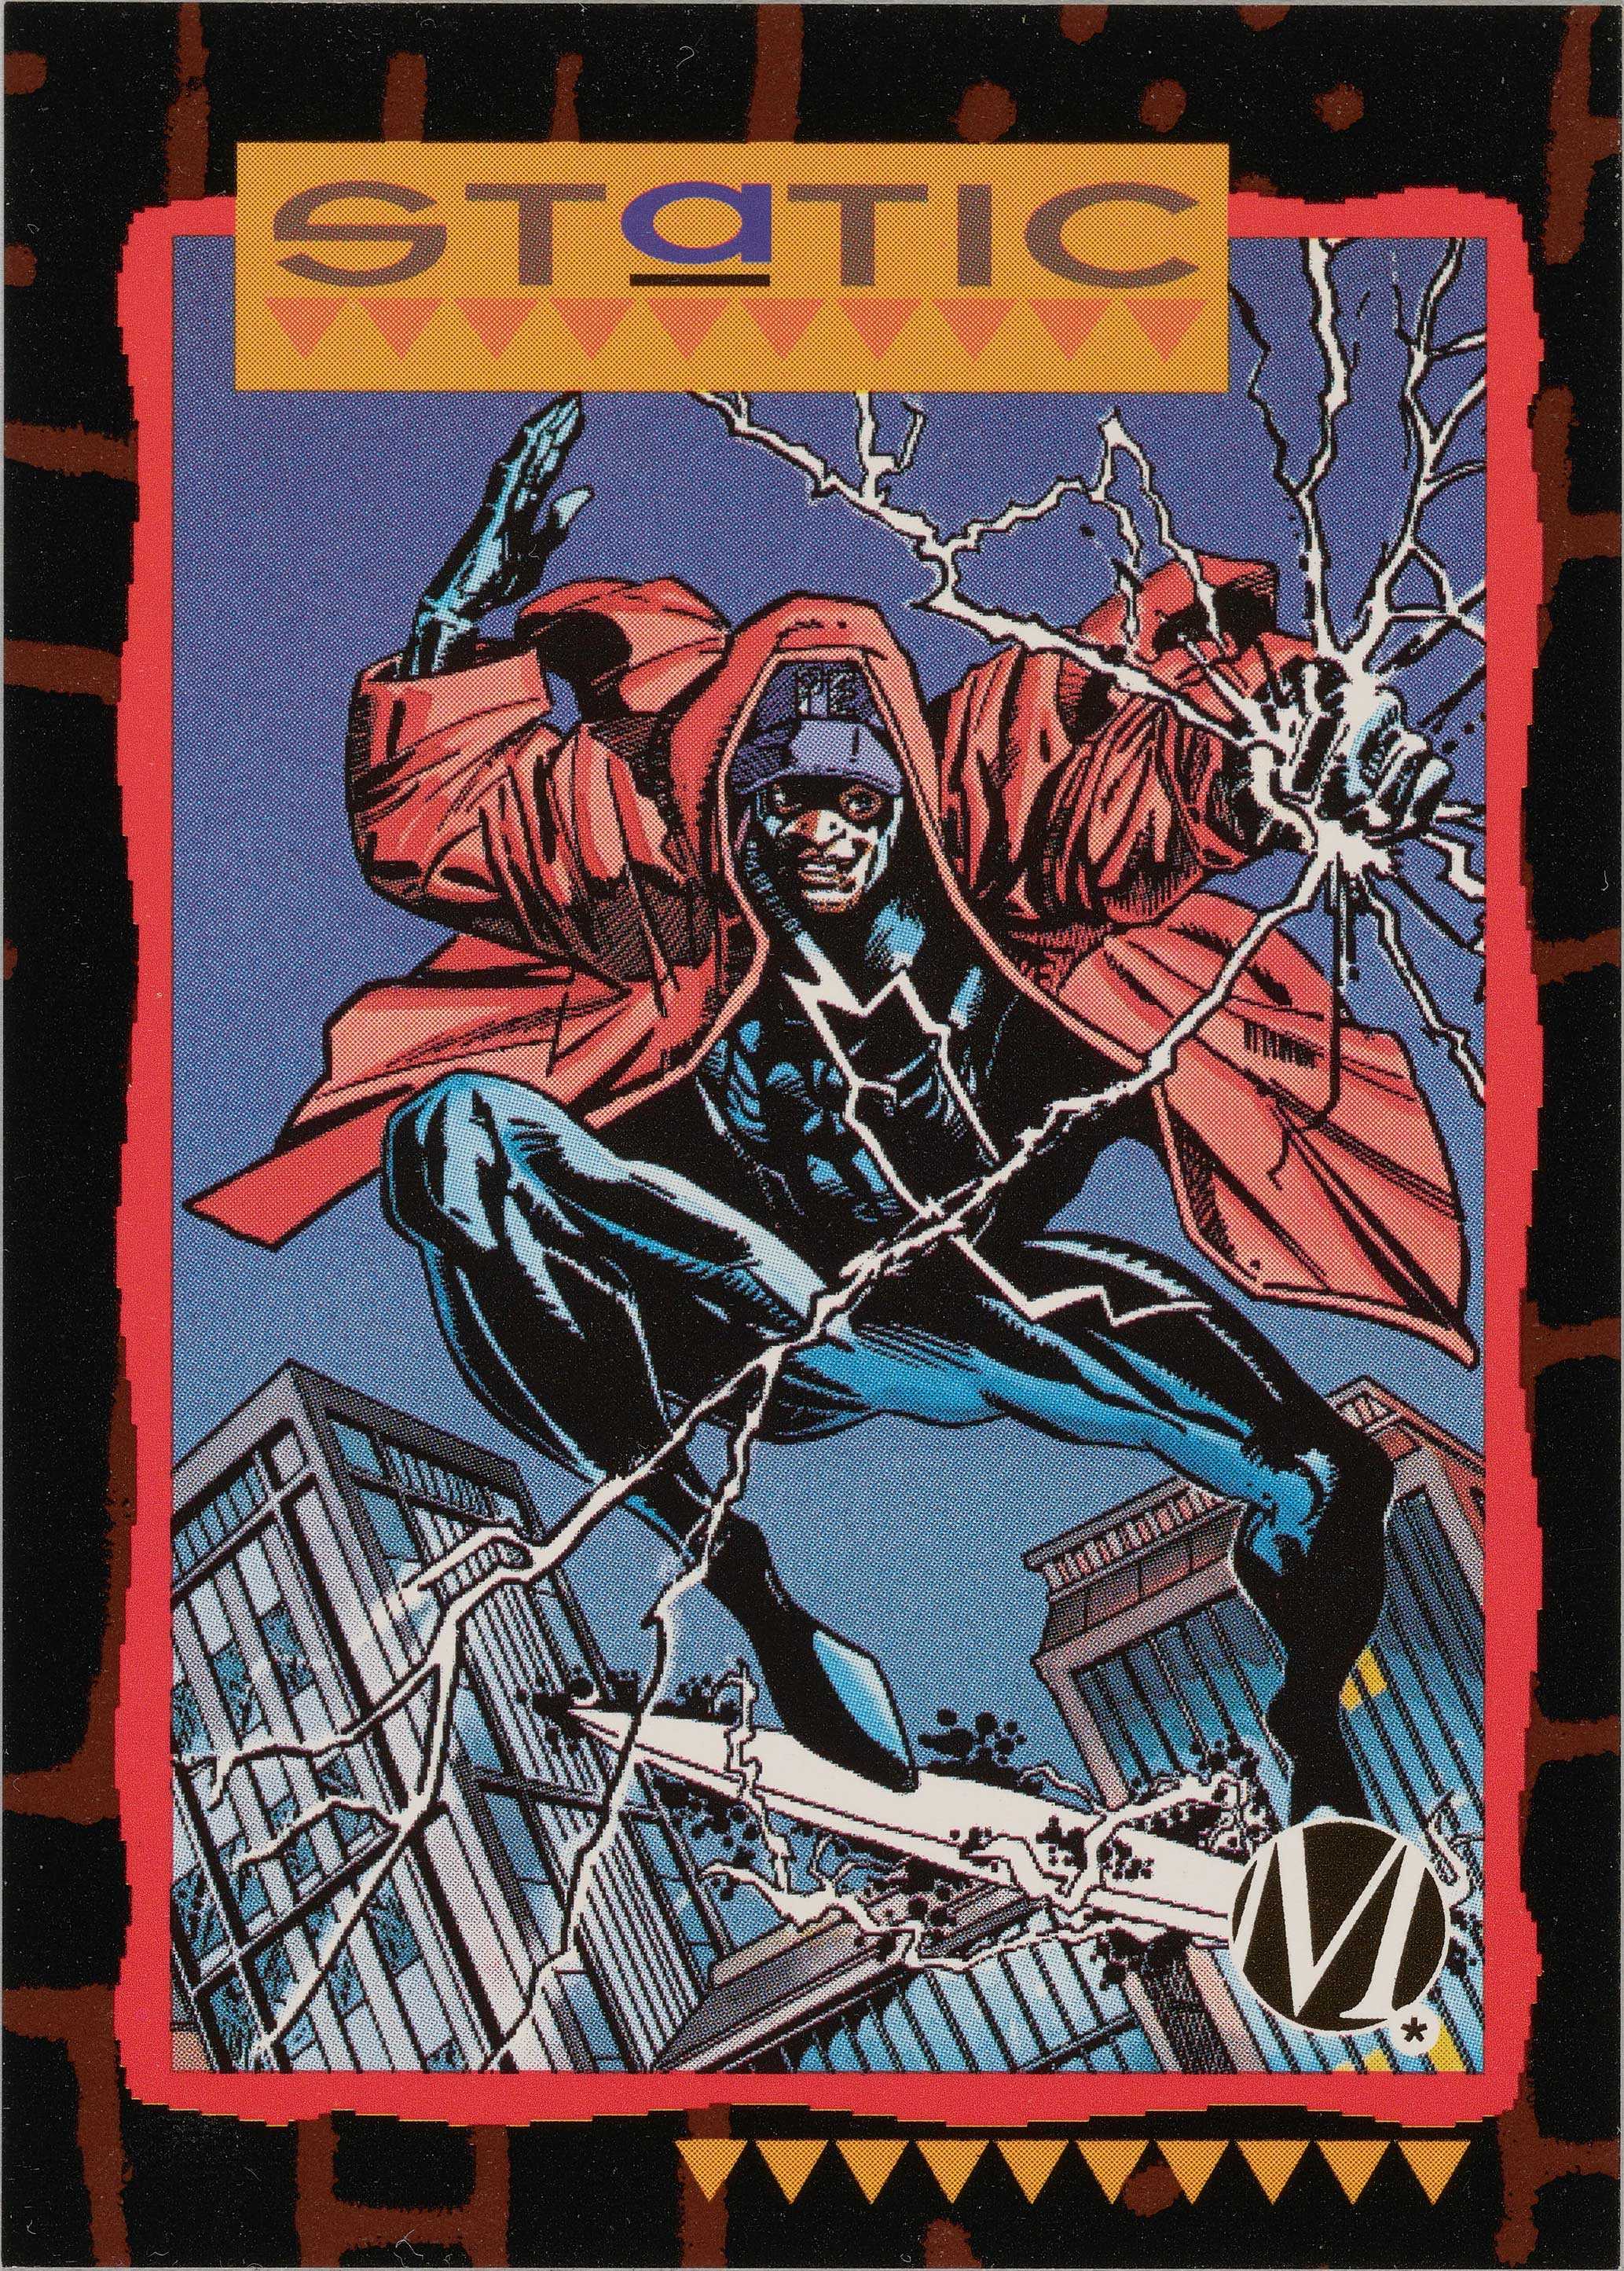 A Milestone trading card features a color image of the character Static.